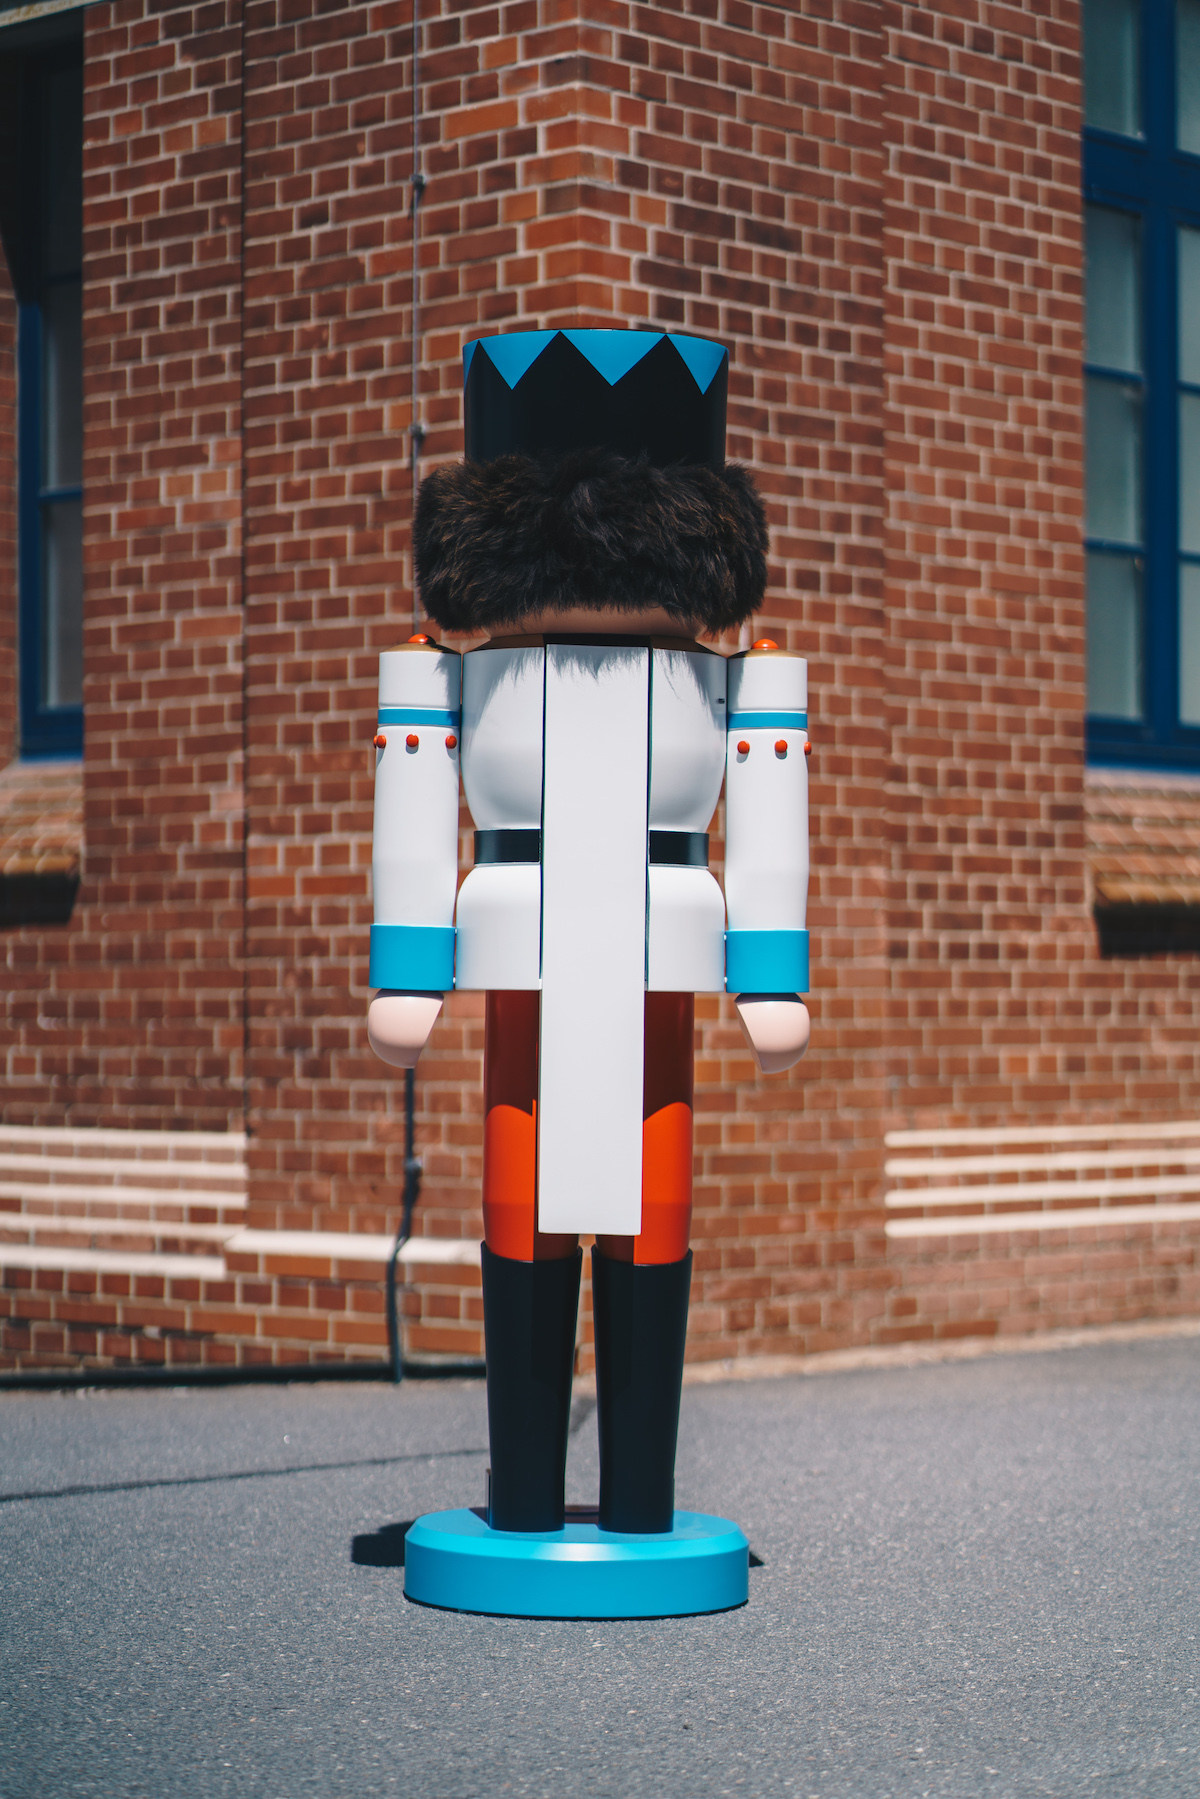 The rear view of a large figure (large nutcracker) can be seen. This one looks at a wall in the background.